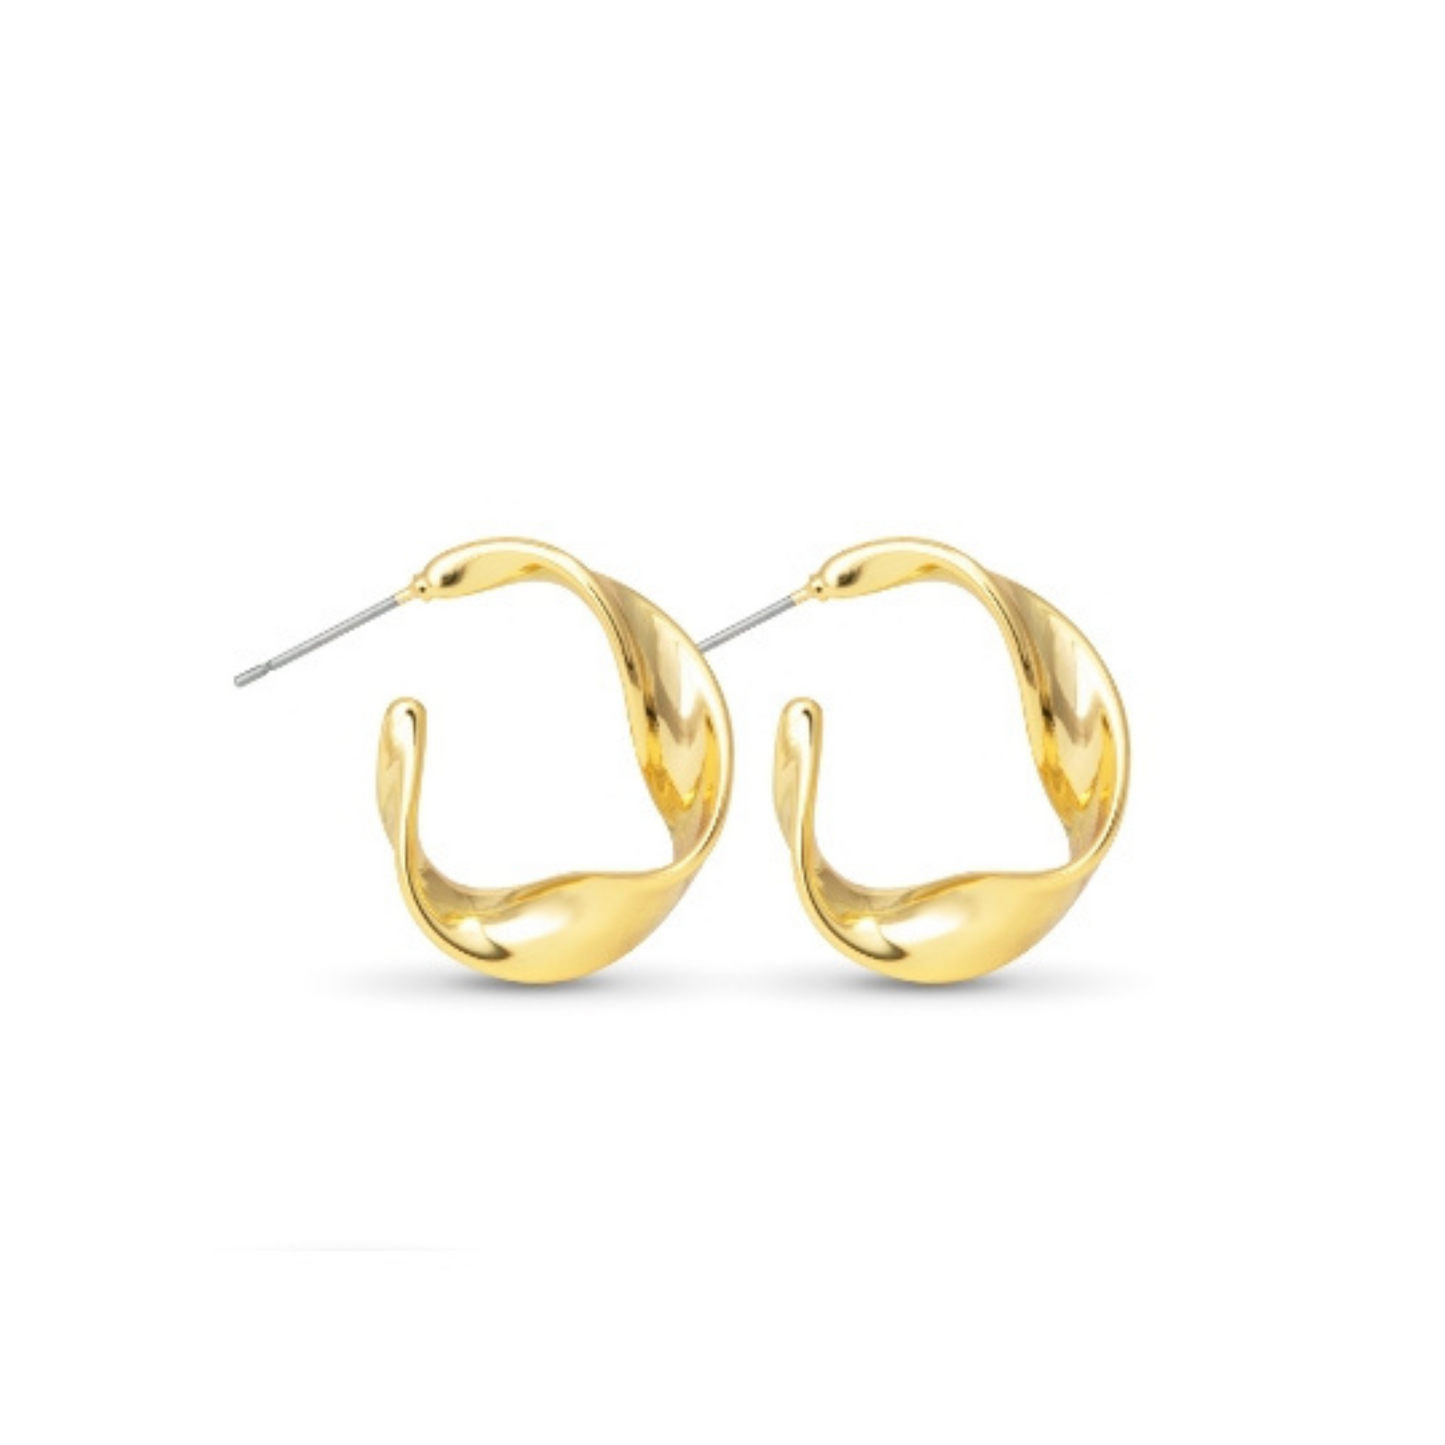 Crafted with expert precision, the Ashley Twisted Gold Hoop earrings feature a delicate twisted design and are crafted with 18k gold plating. These timeless earrings add a touch of elegance and sophistication to any outfit, making them a must-have accessory for any fashion-forward individual.